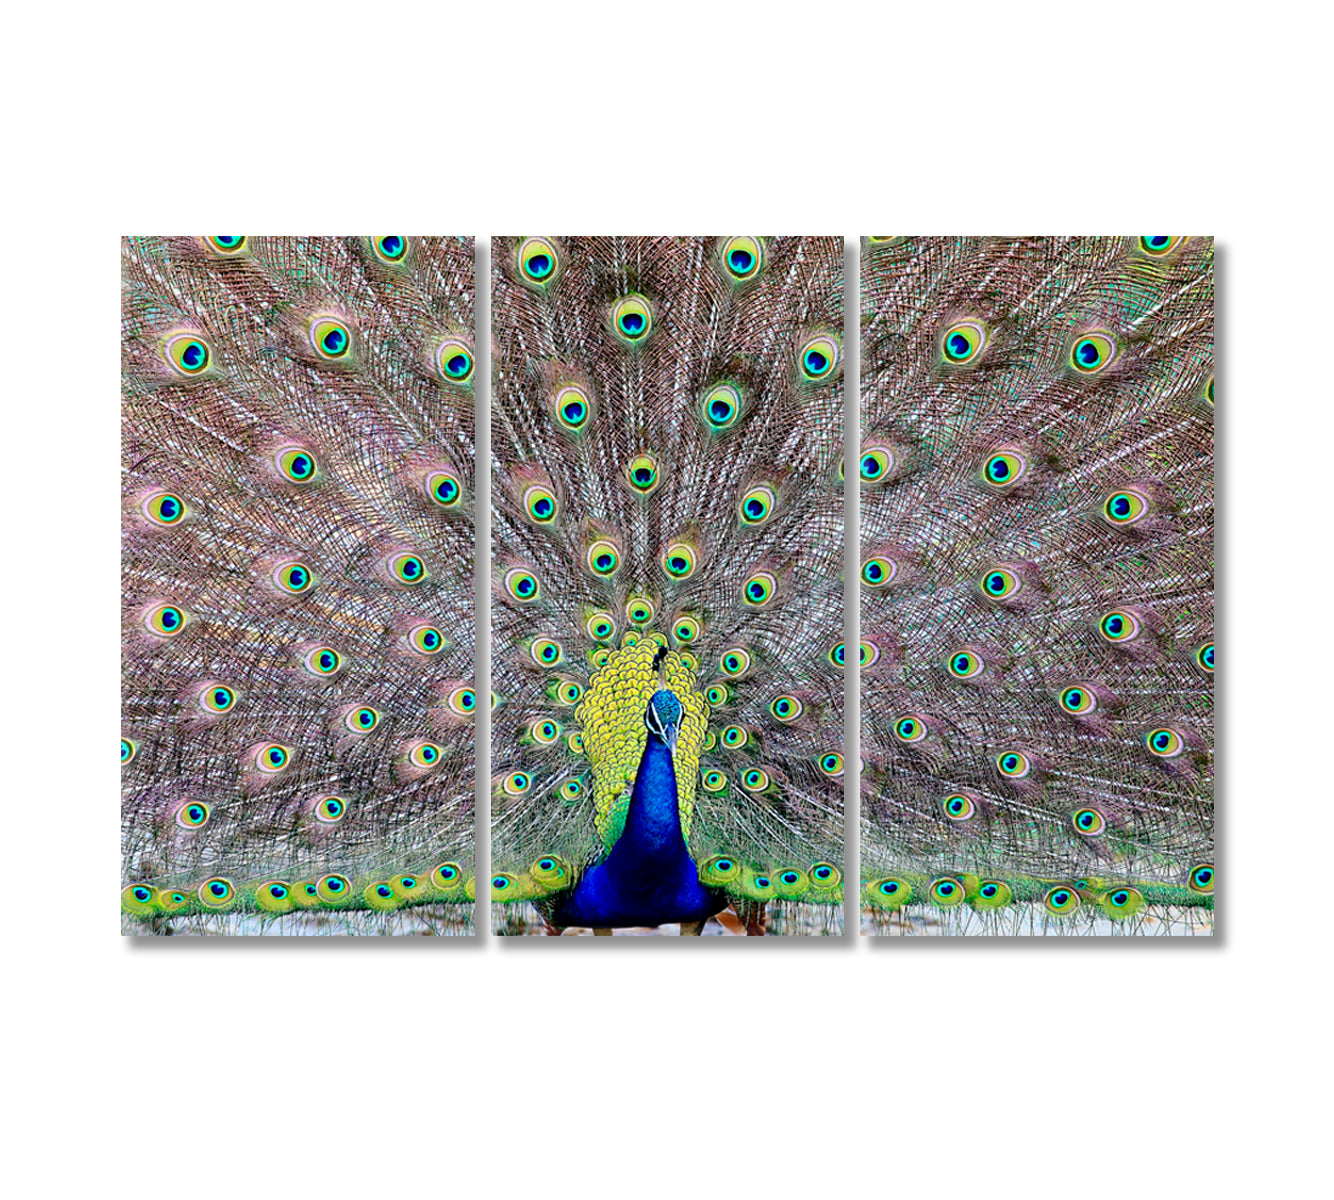 Peacock Showing Off His Tail Feathers Canvas Print-Canvas Print-CetArt-3 Panels-36x24 inches-CetArt